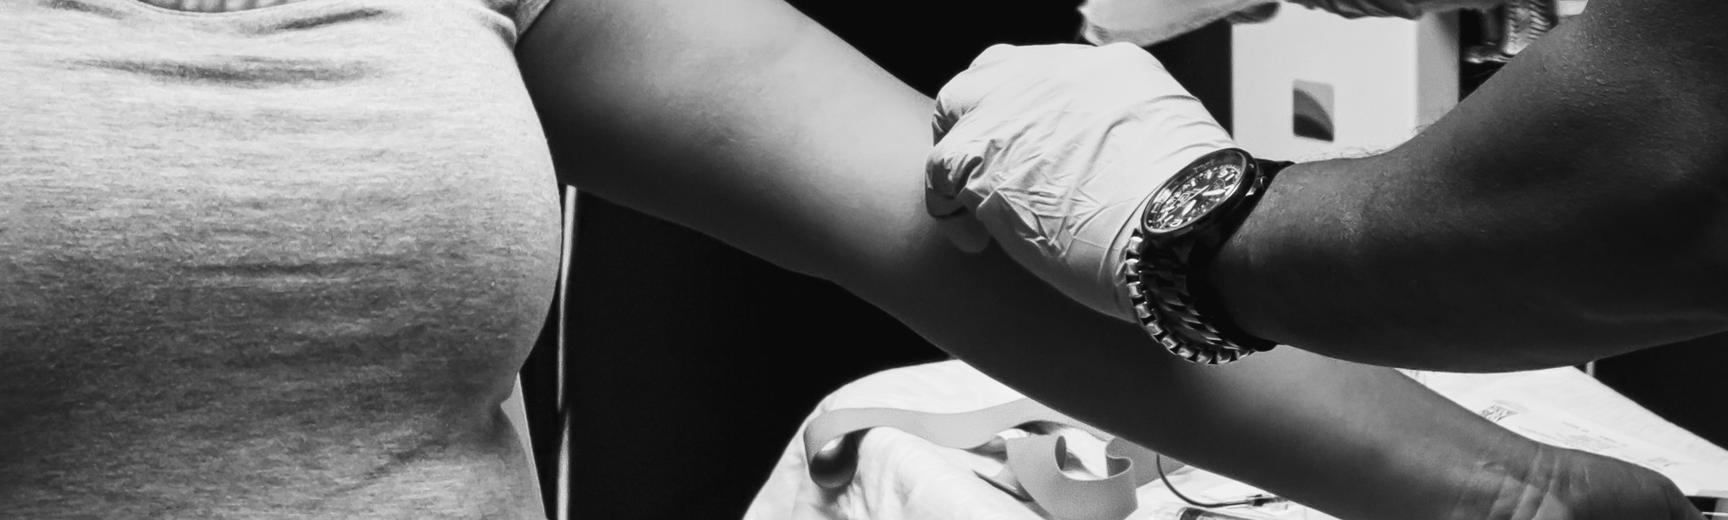 A black and white image of a medical professional, who is wearing gloves, preparing a patient's arm for an injection